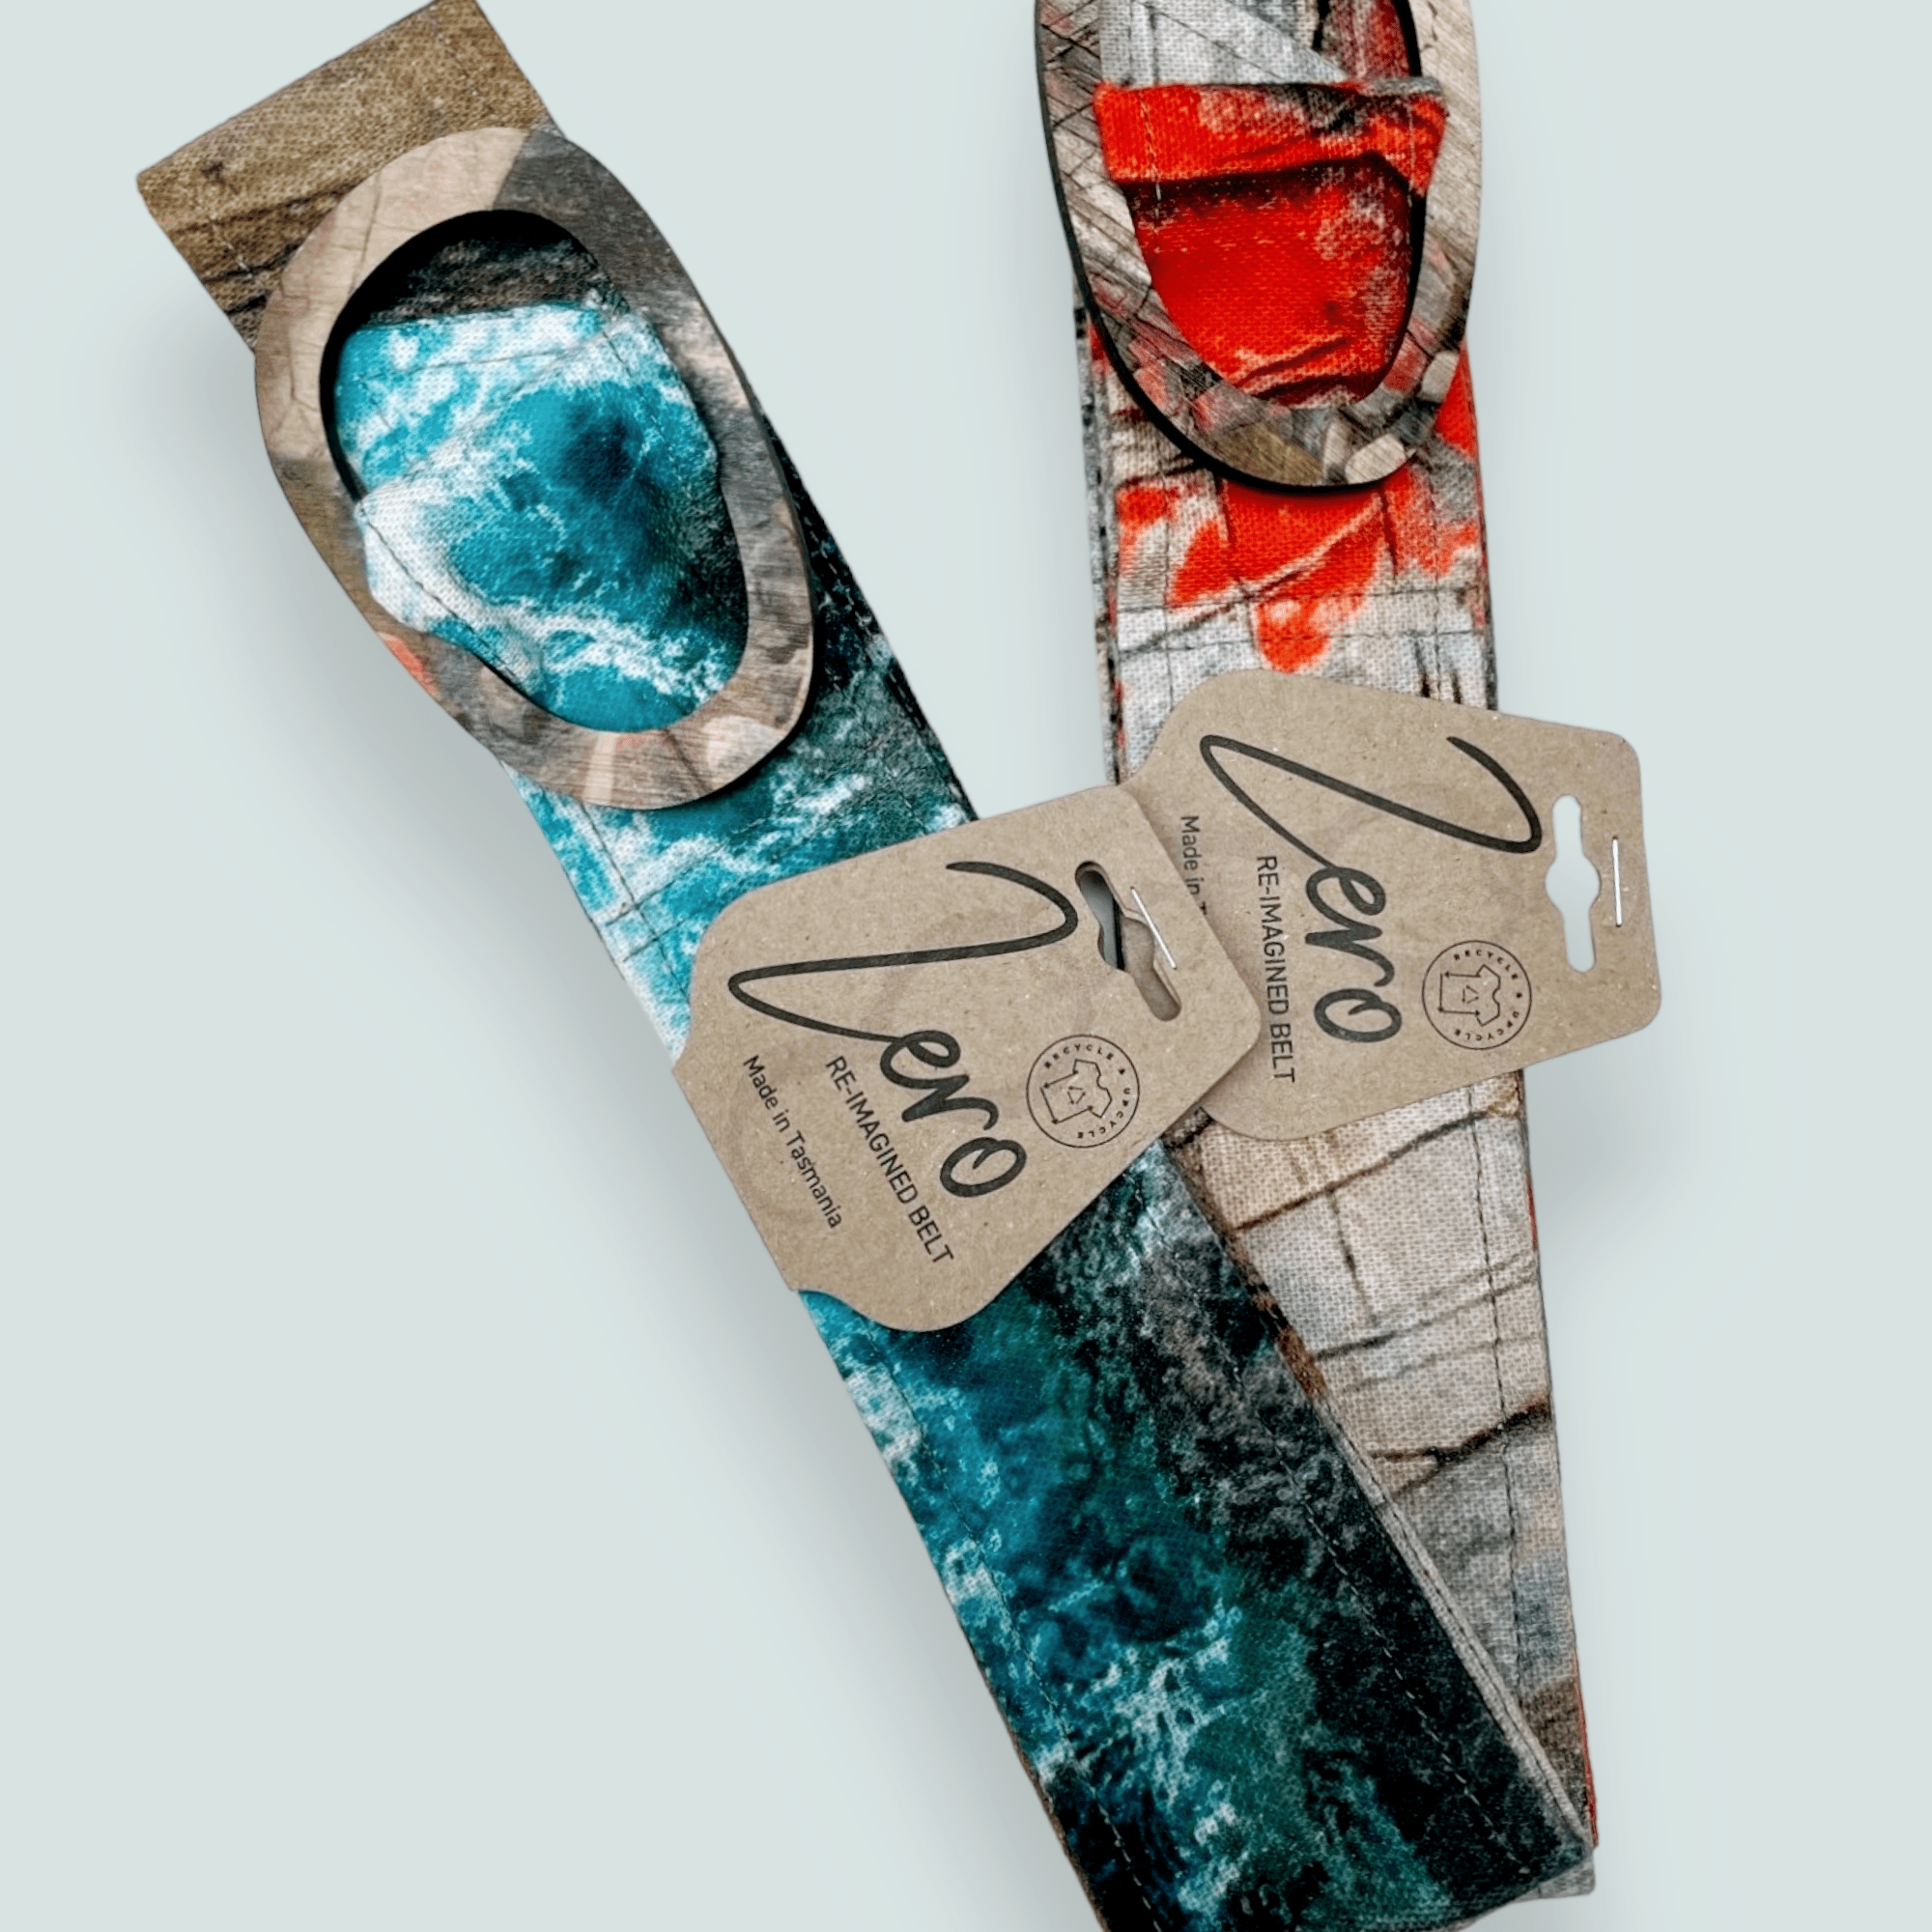 Tasmanian Oak Belts - Printed Organic Linen Belt Buckles The Spotted Quoll Aerial Bay of Fires Printed S - 110cm